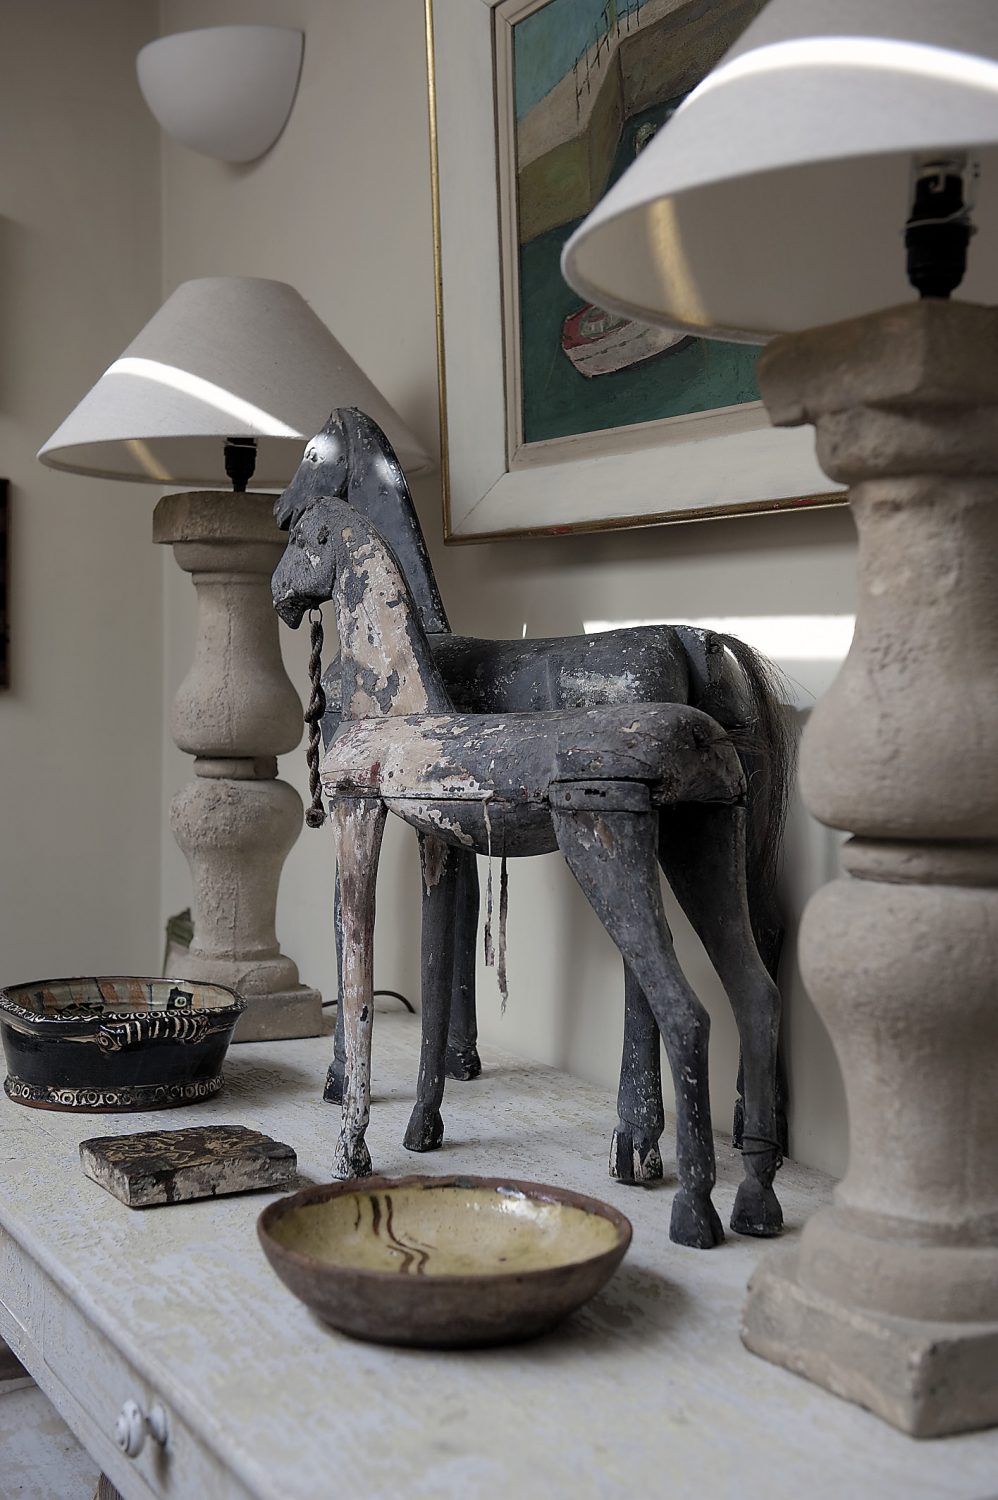 James’ house is filled with artworks, ornaments and curios, the most striking of which are a pair of toy wooden horses